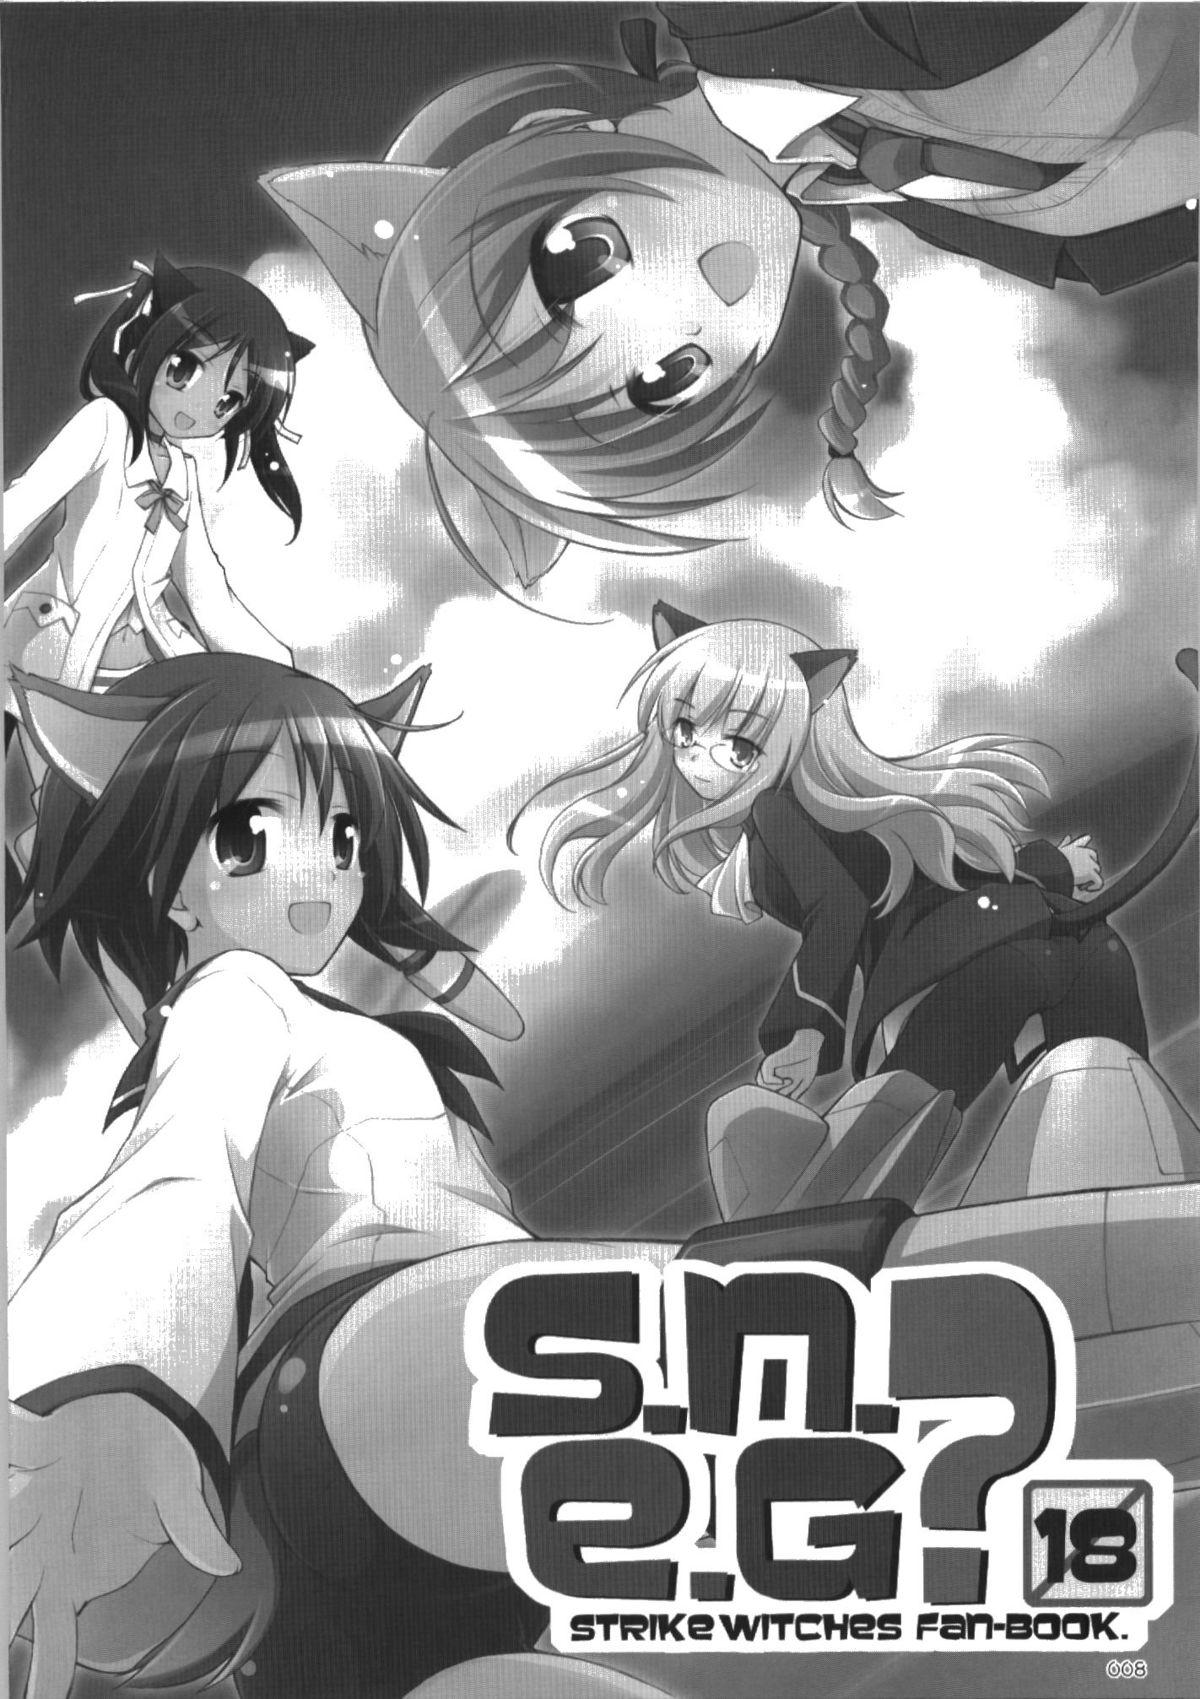 Fuck My Pussy Hard s.n.e.g? - Strike witches Barely 18 Porn - Page 8